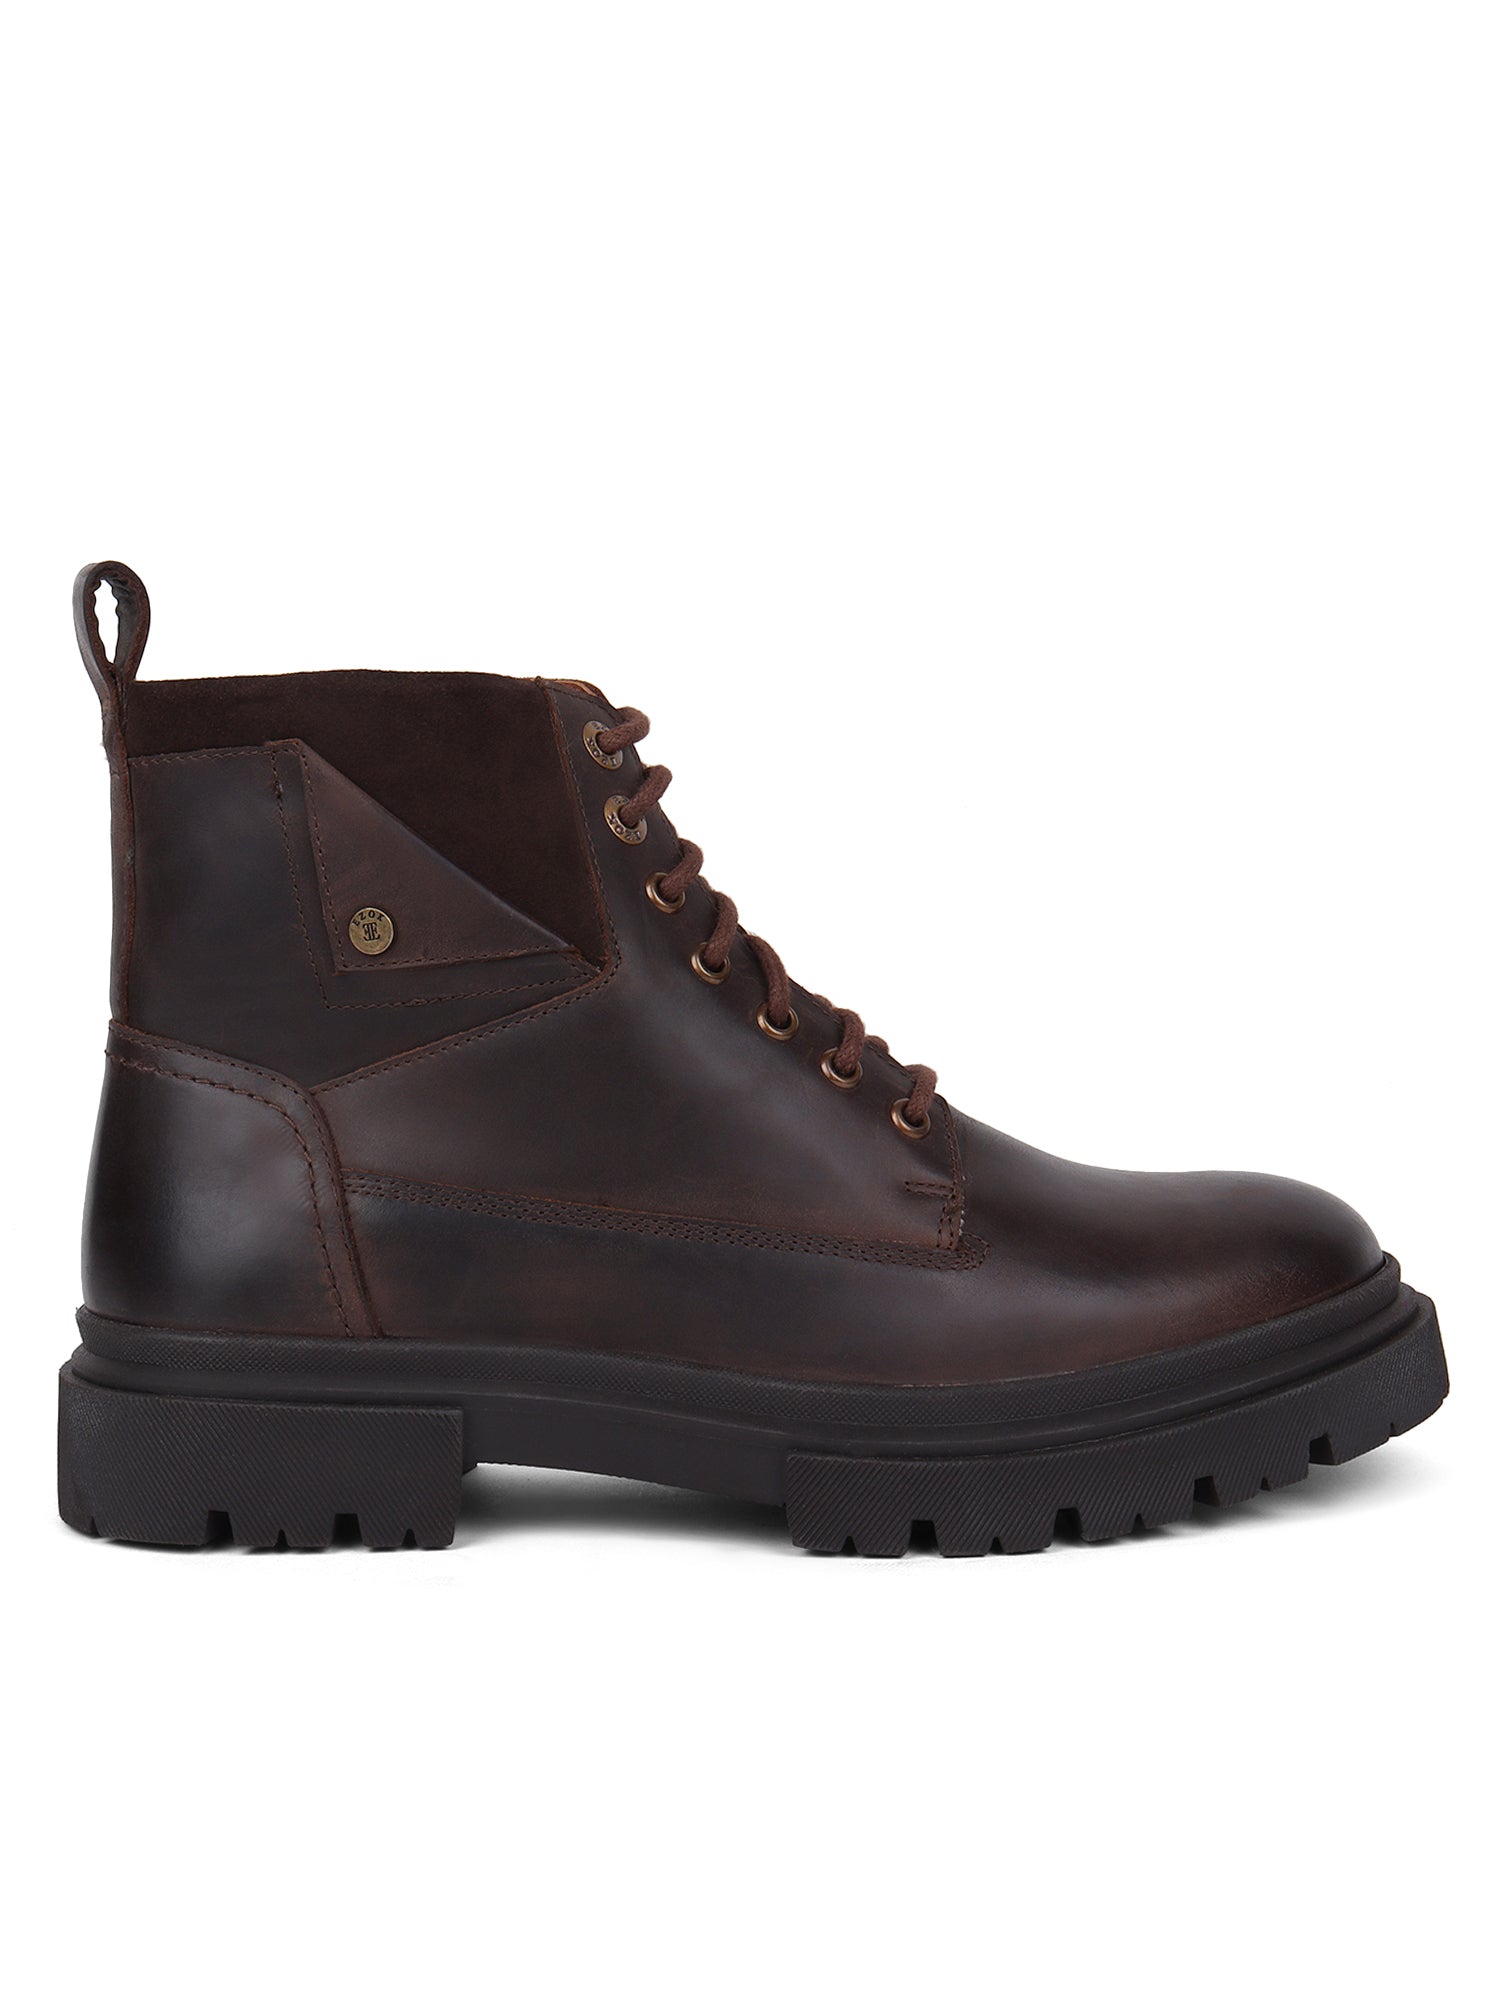 Ezok Chocolate Stan Casual Boots Shoes